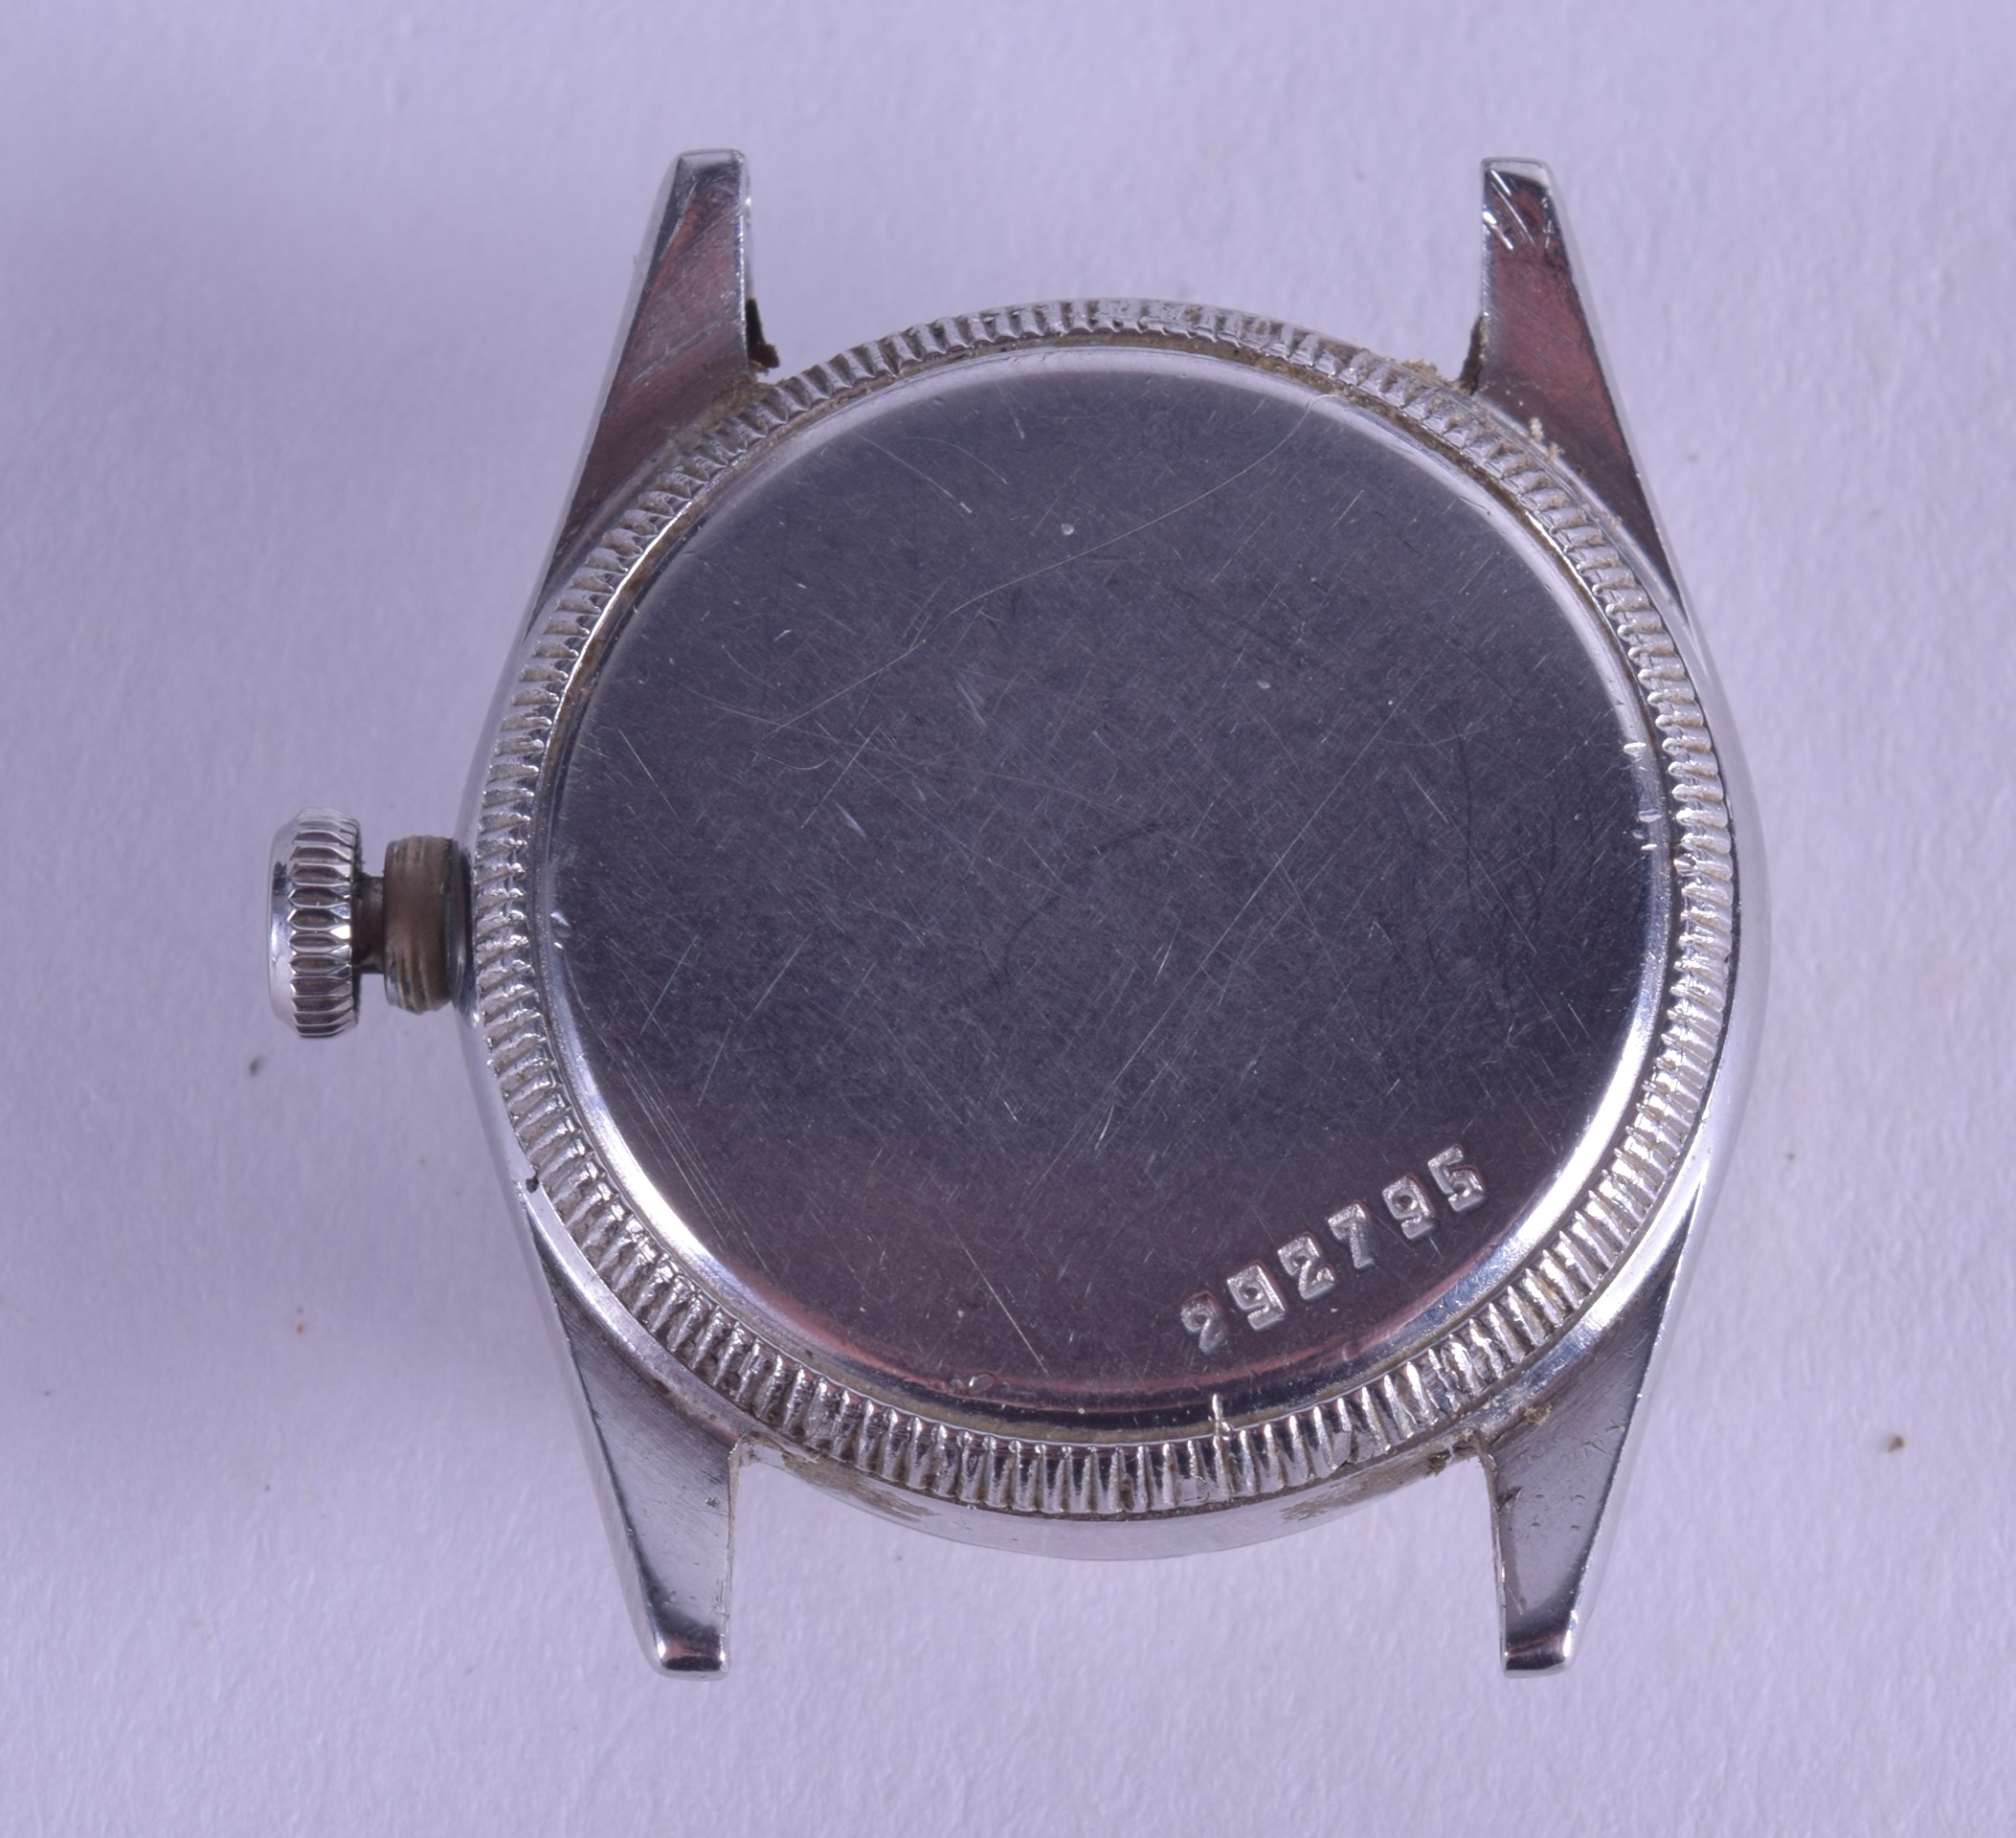 A VINTAGE ROLEX OYSTER STAINLESS STEEL WATCH DIAL AND MOVEMENT with circular face and gilt numerals. - Image 2 of 4